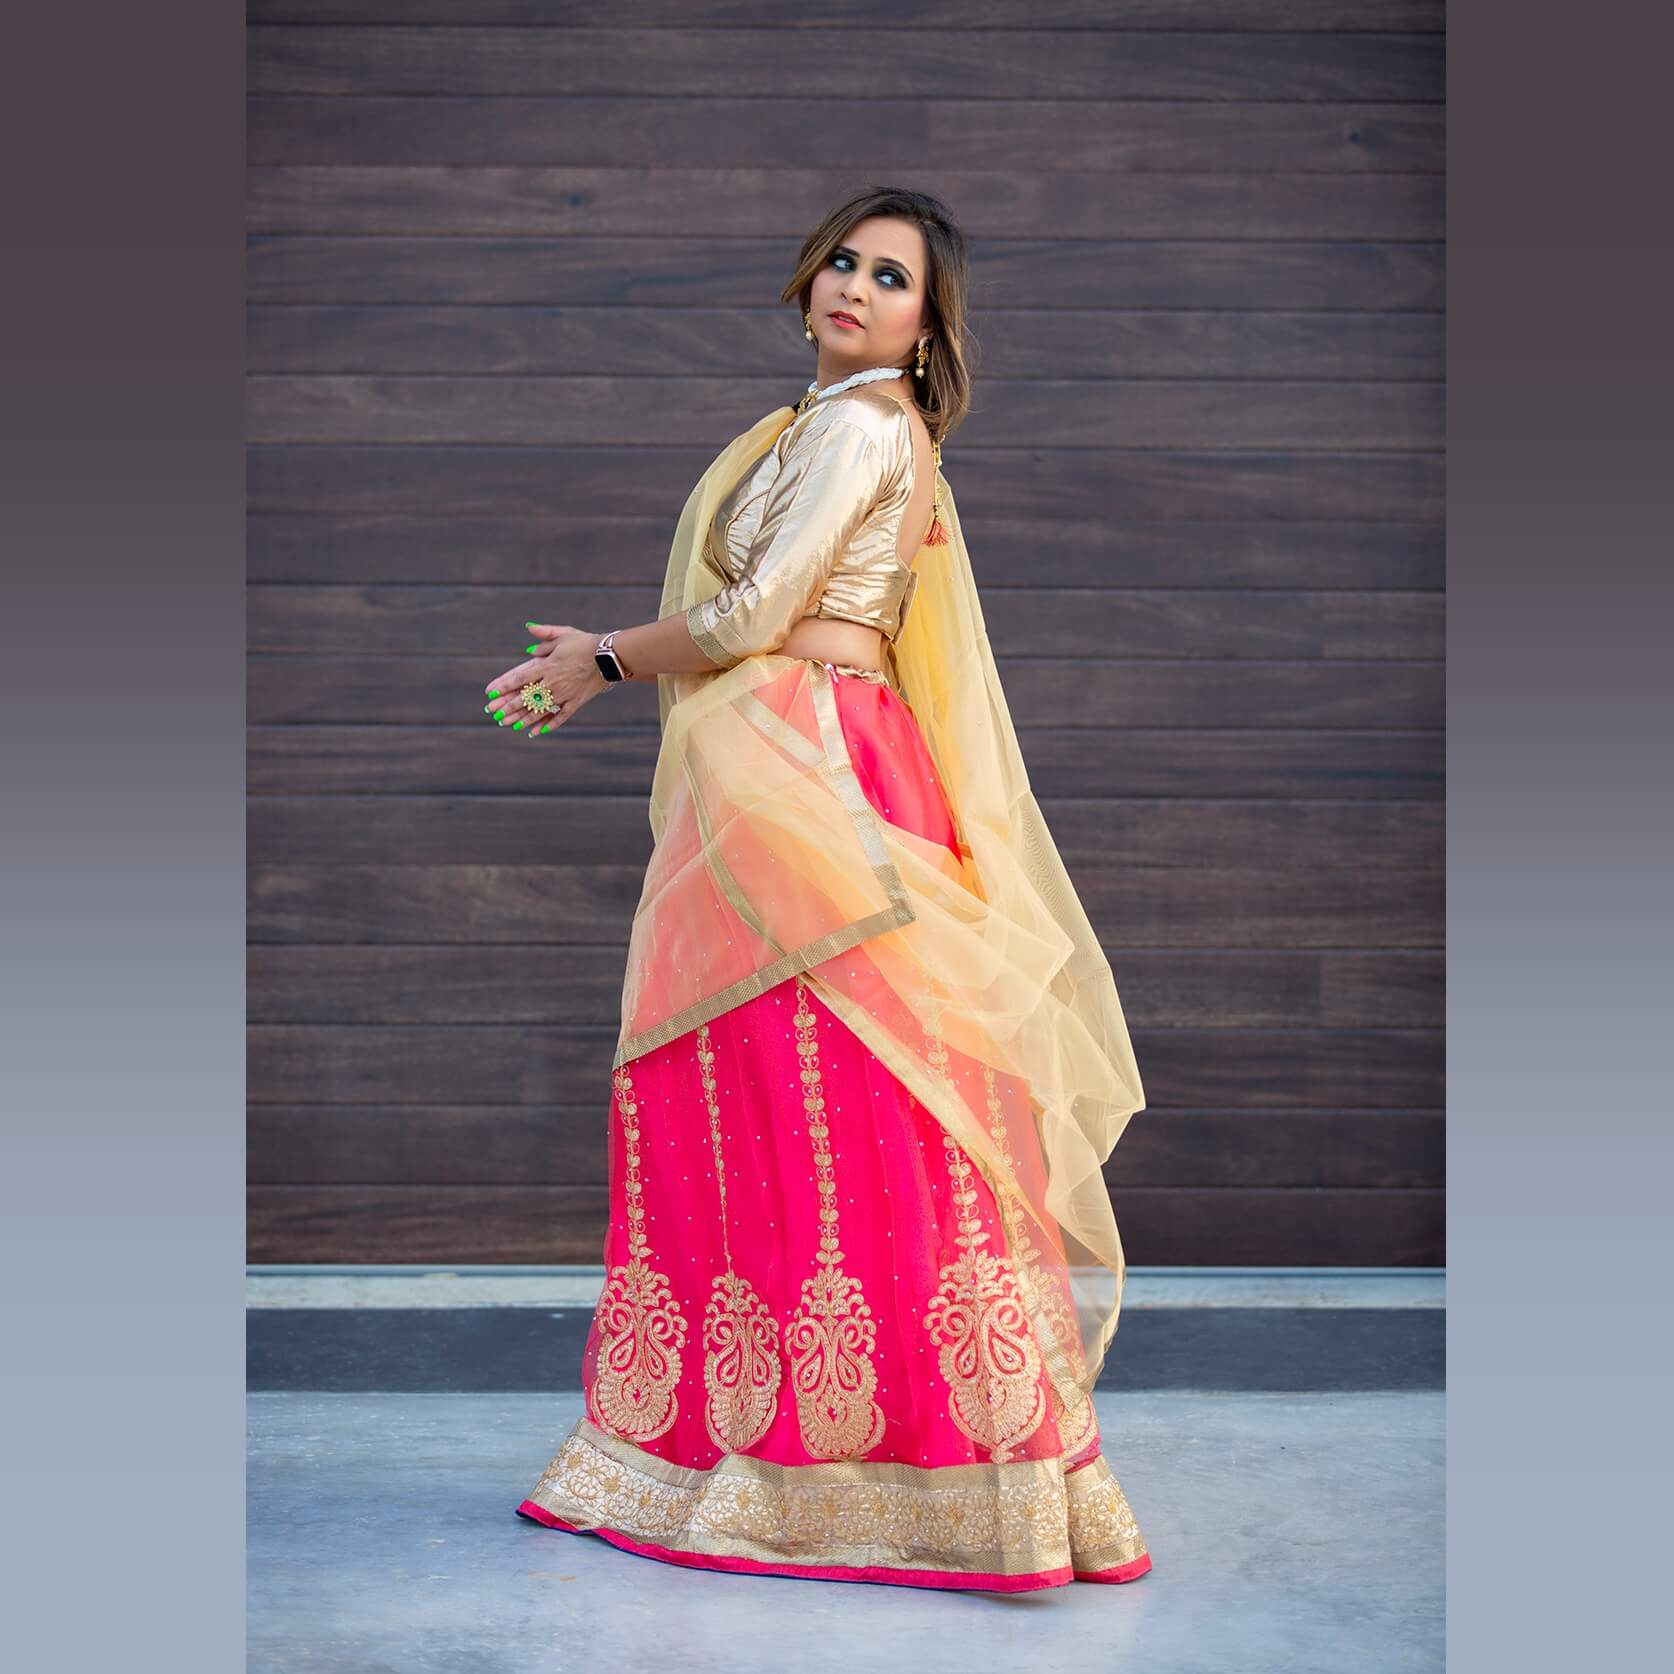 Photo of White and Pink Bridal Lehenga with Gold Blouse